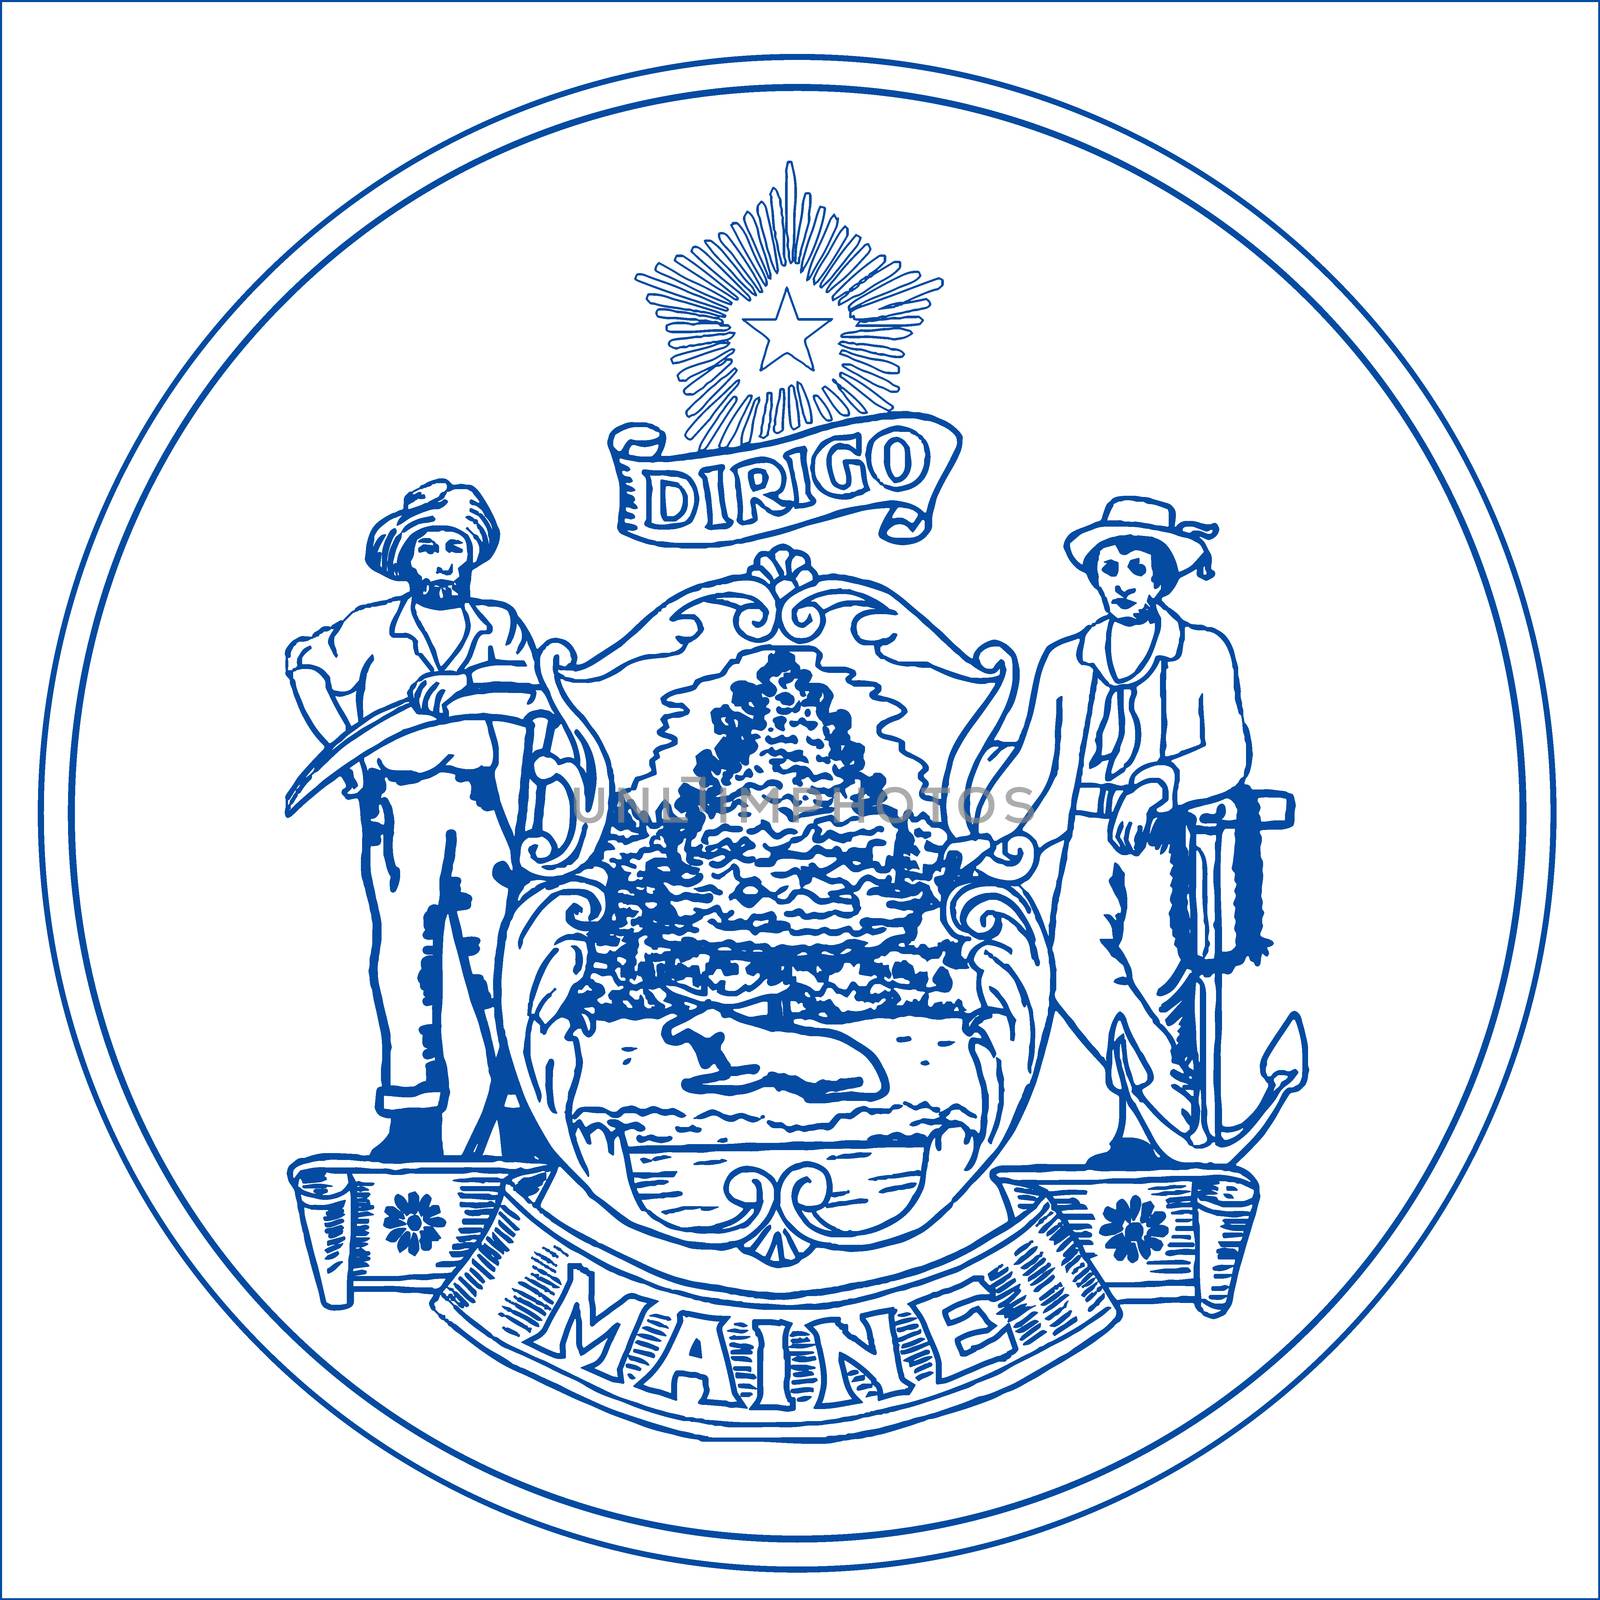 Maine state seal over a white background